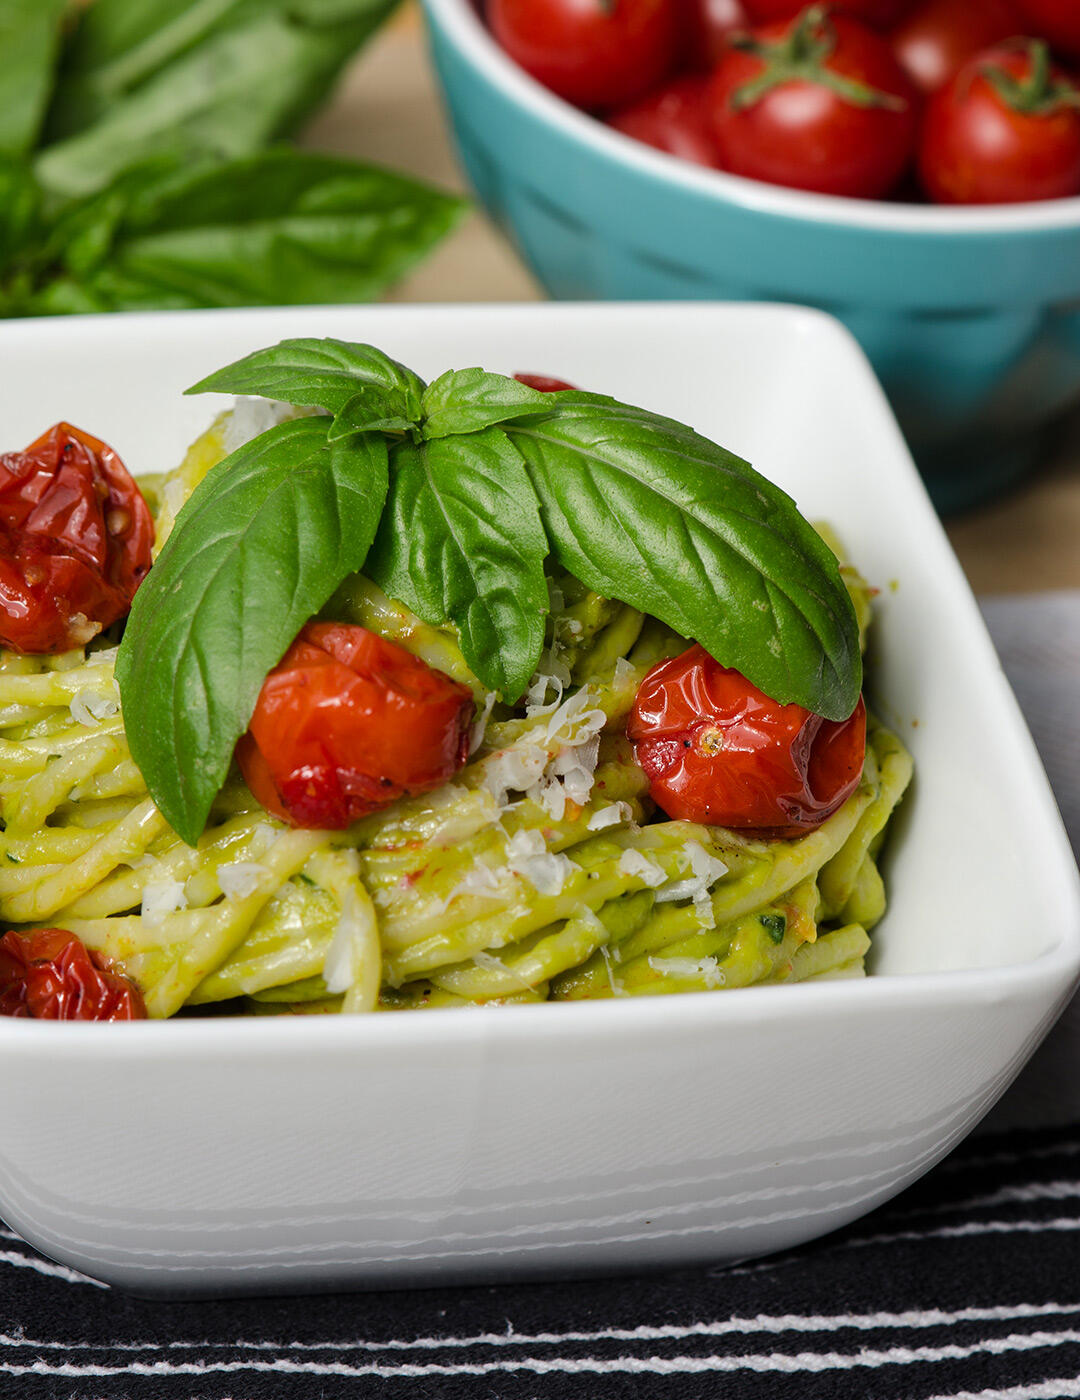 Bowl of pasta tossed with avocado pesto and roasted cherry tomatoes.